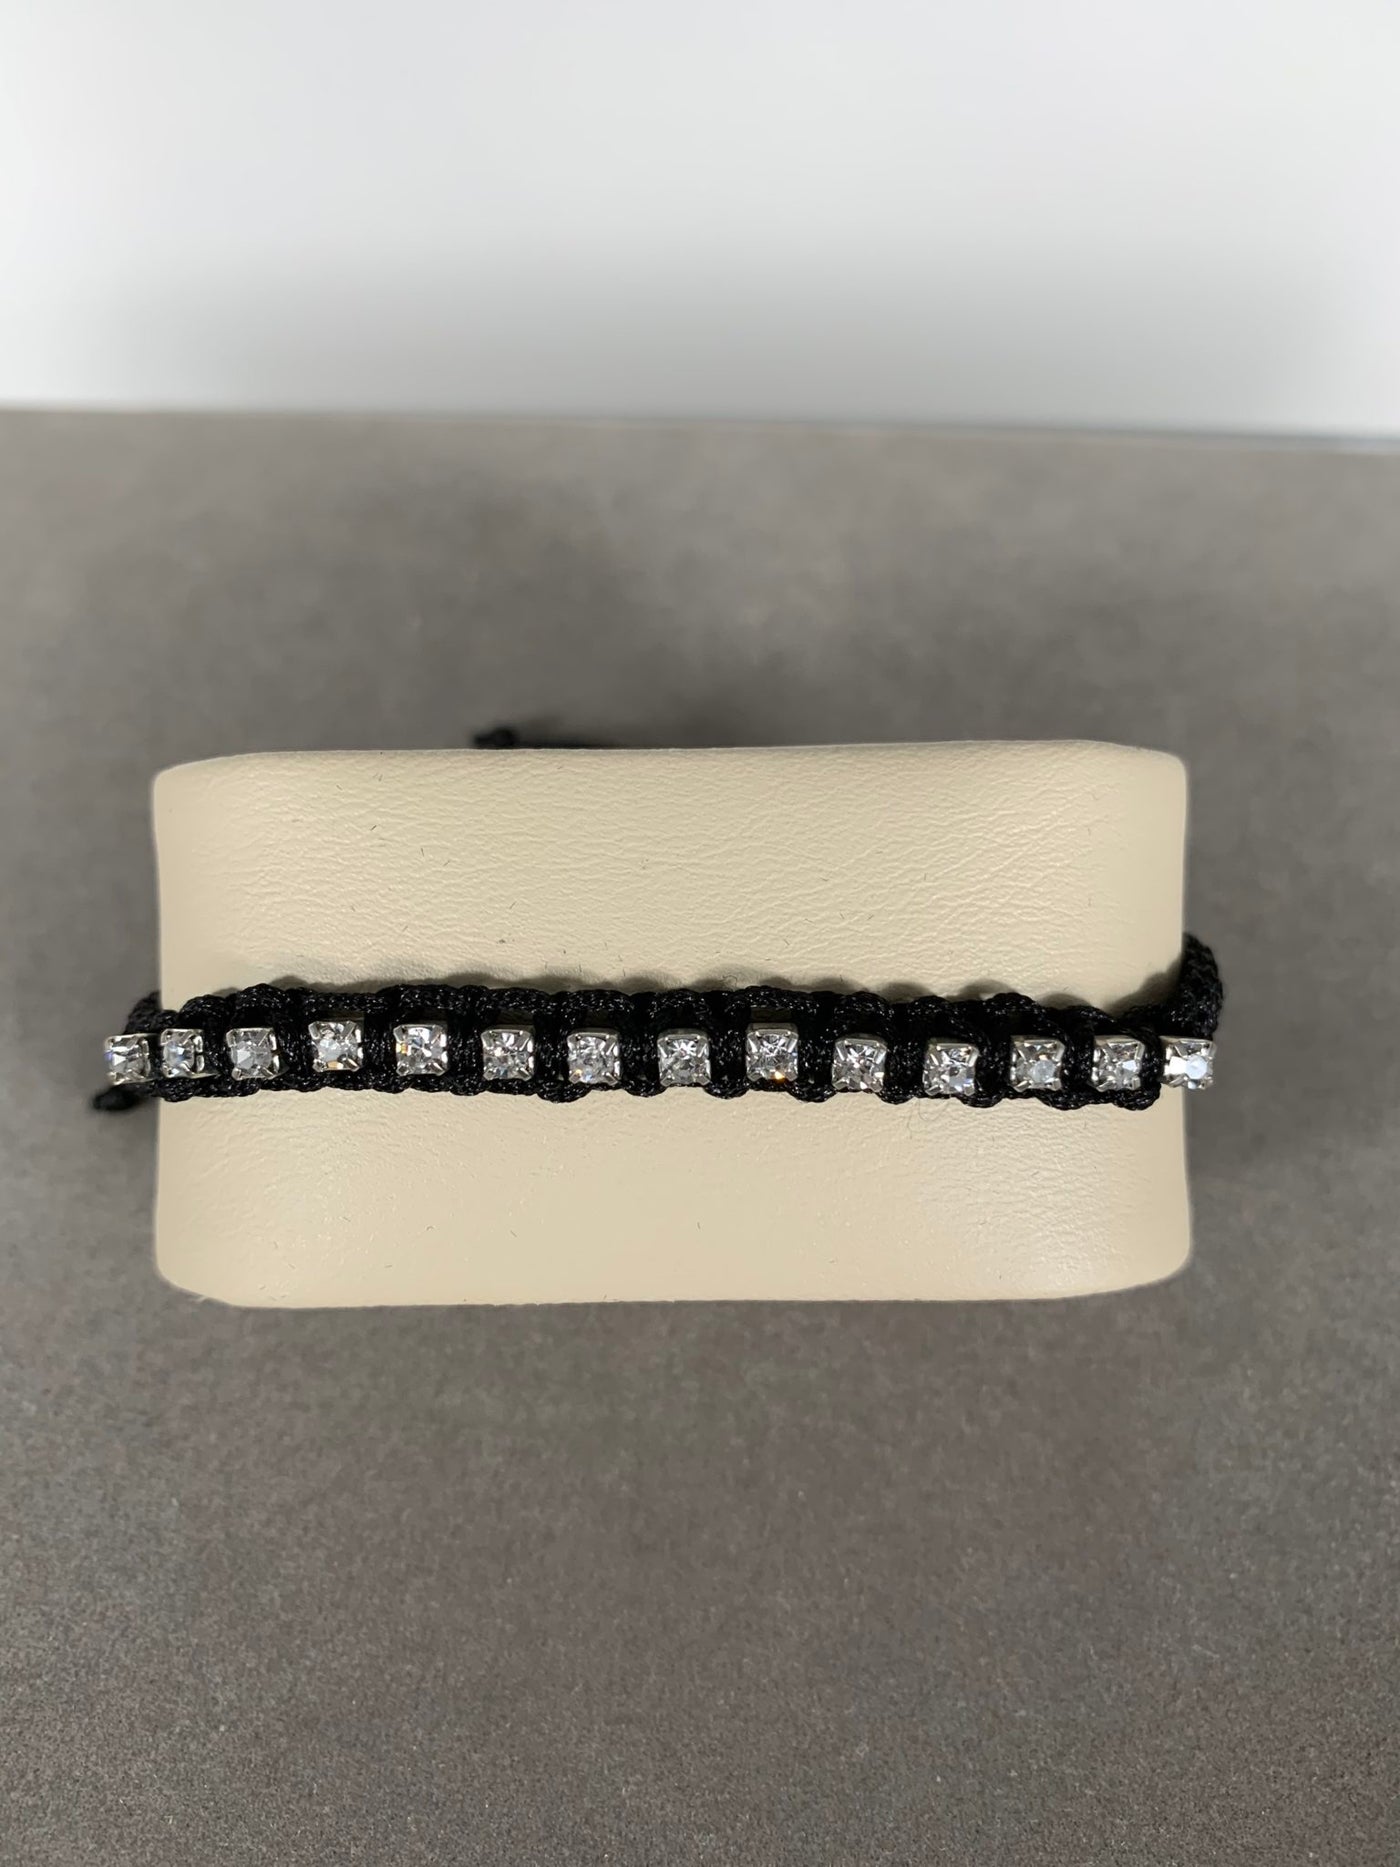 Black Braided Bracelet with Crystals